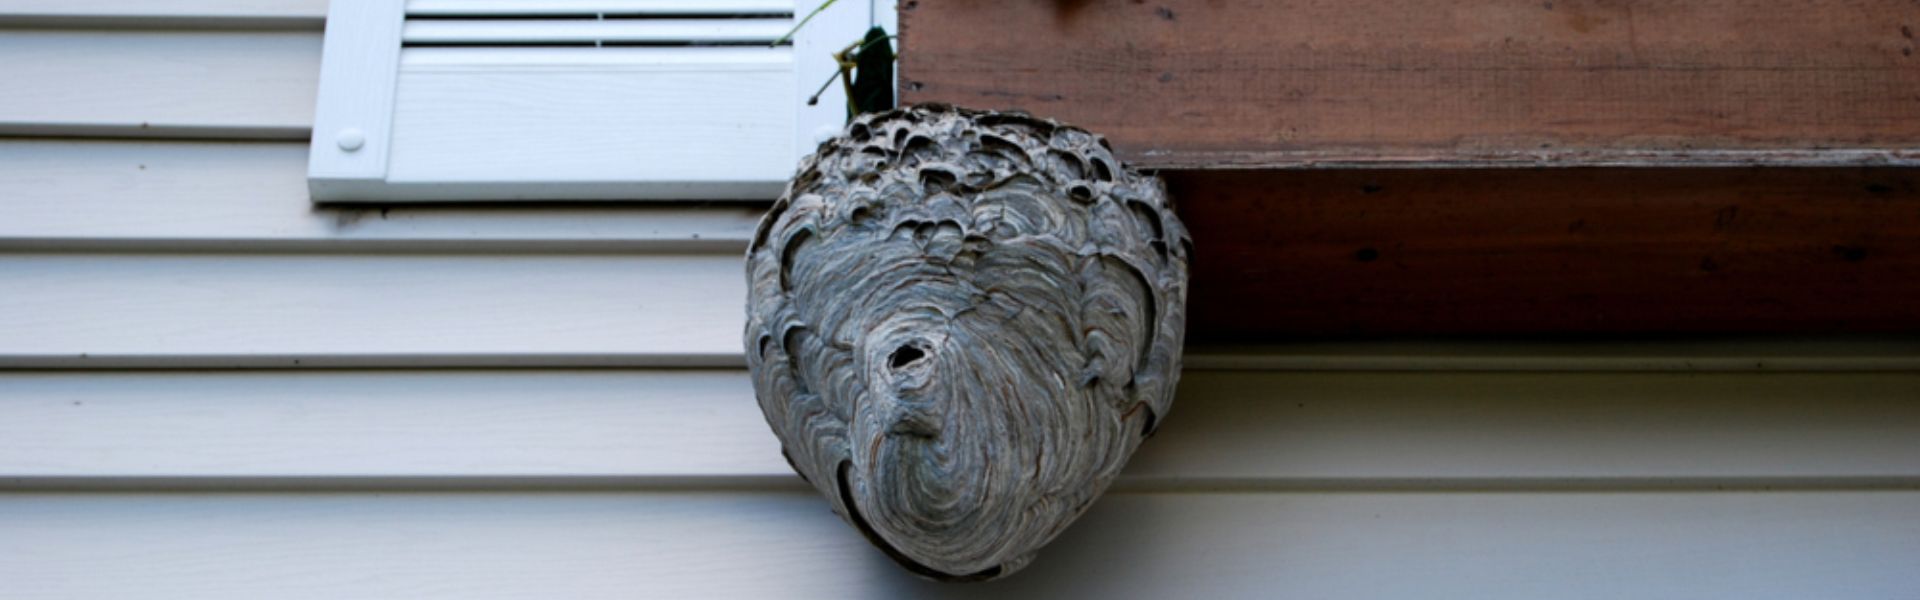 Wasp Nest Removal Toronto: Safely Dealing with Stinging Pests